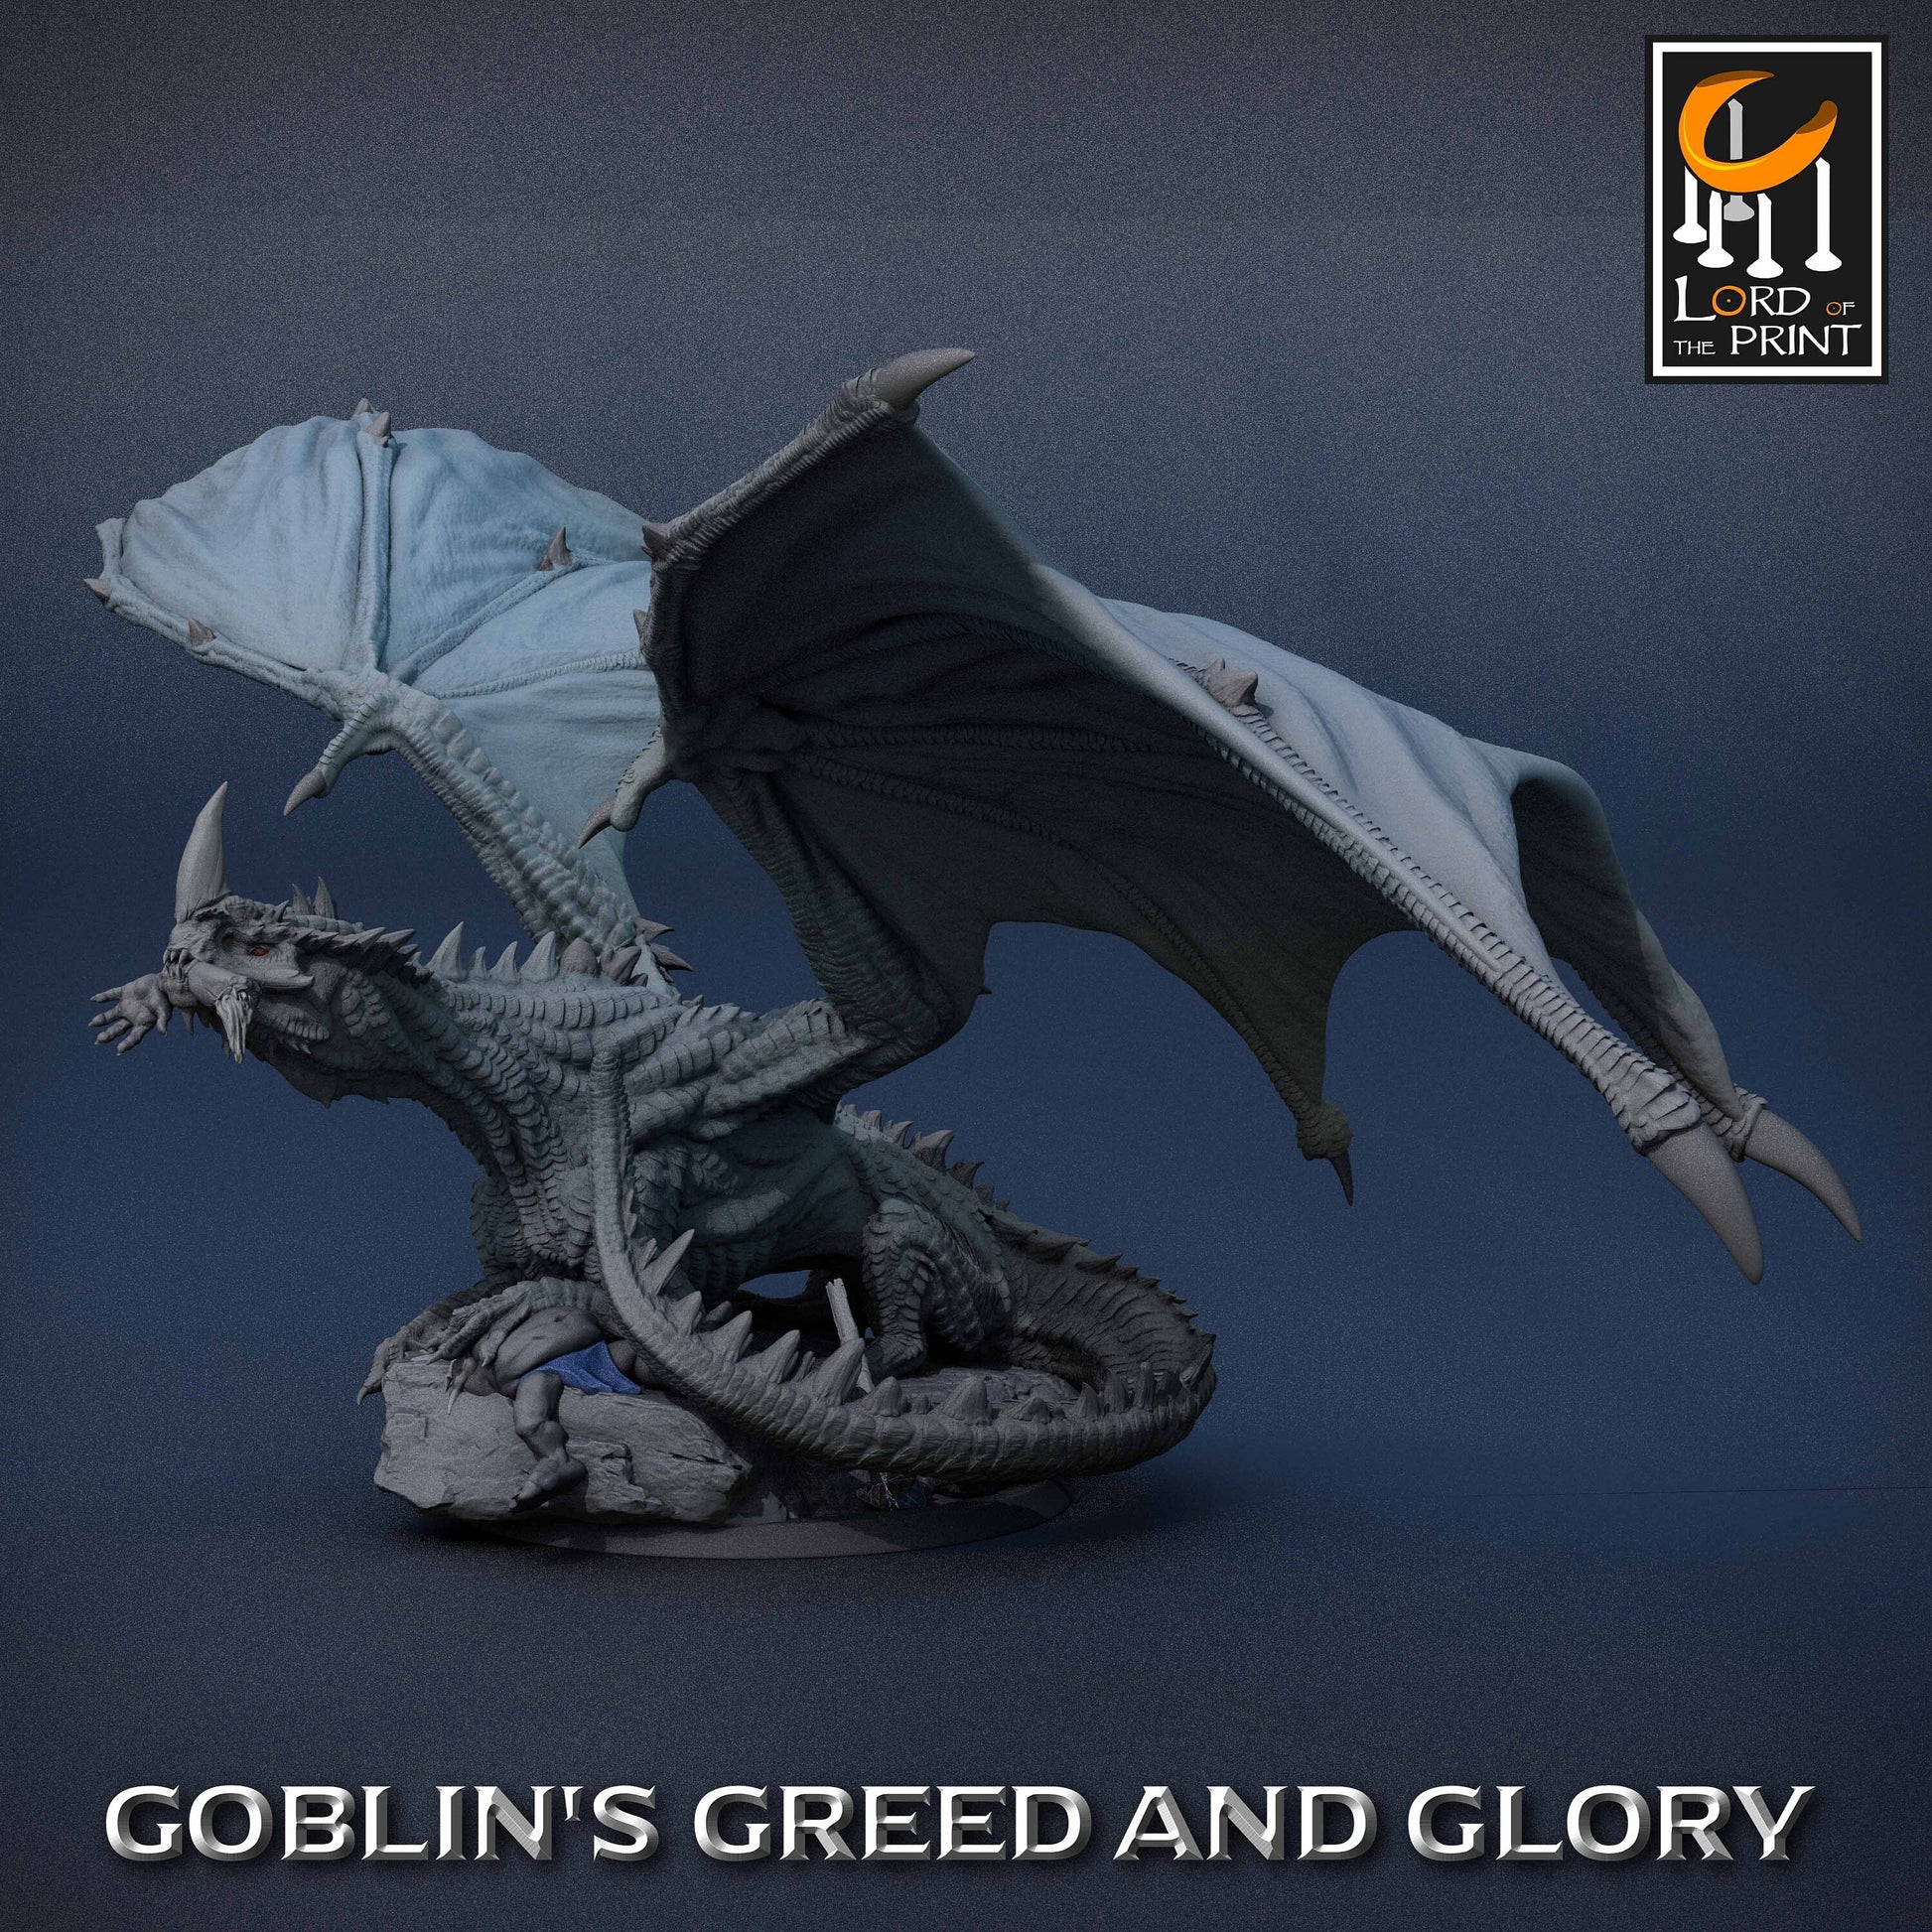 Green Chromatic Dragon | RPG Miniature for Dungeons and Dragons|Pathfinder|Tabletop Wargaming | Dragon Miniature | Lord of the Print